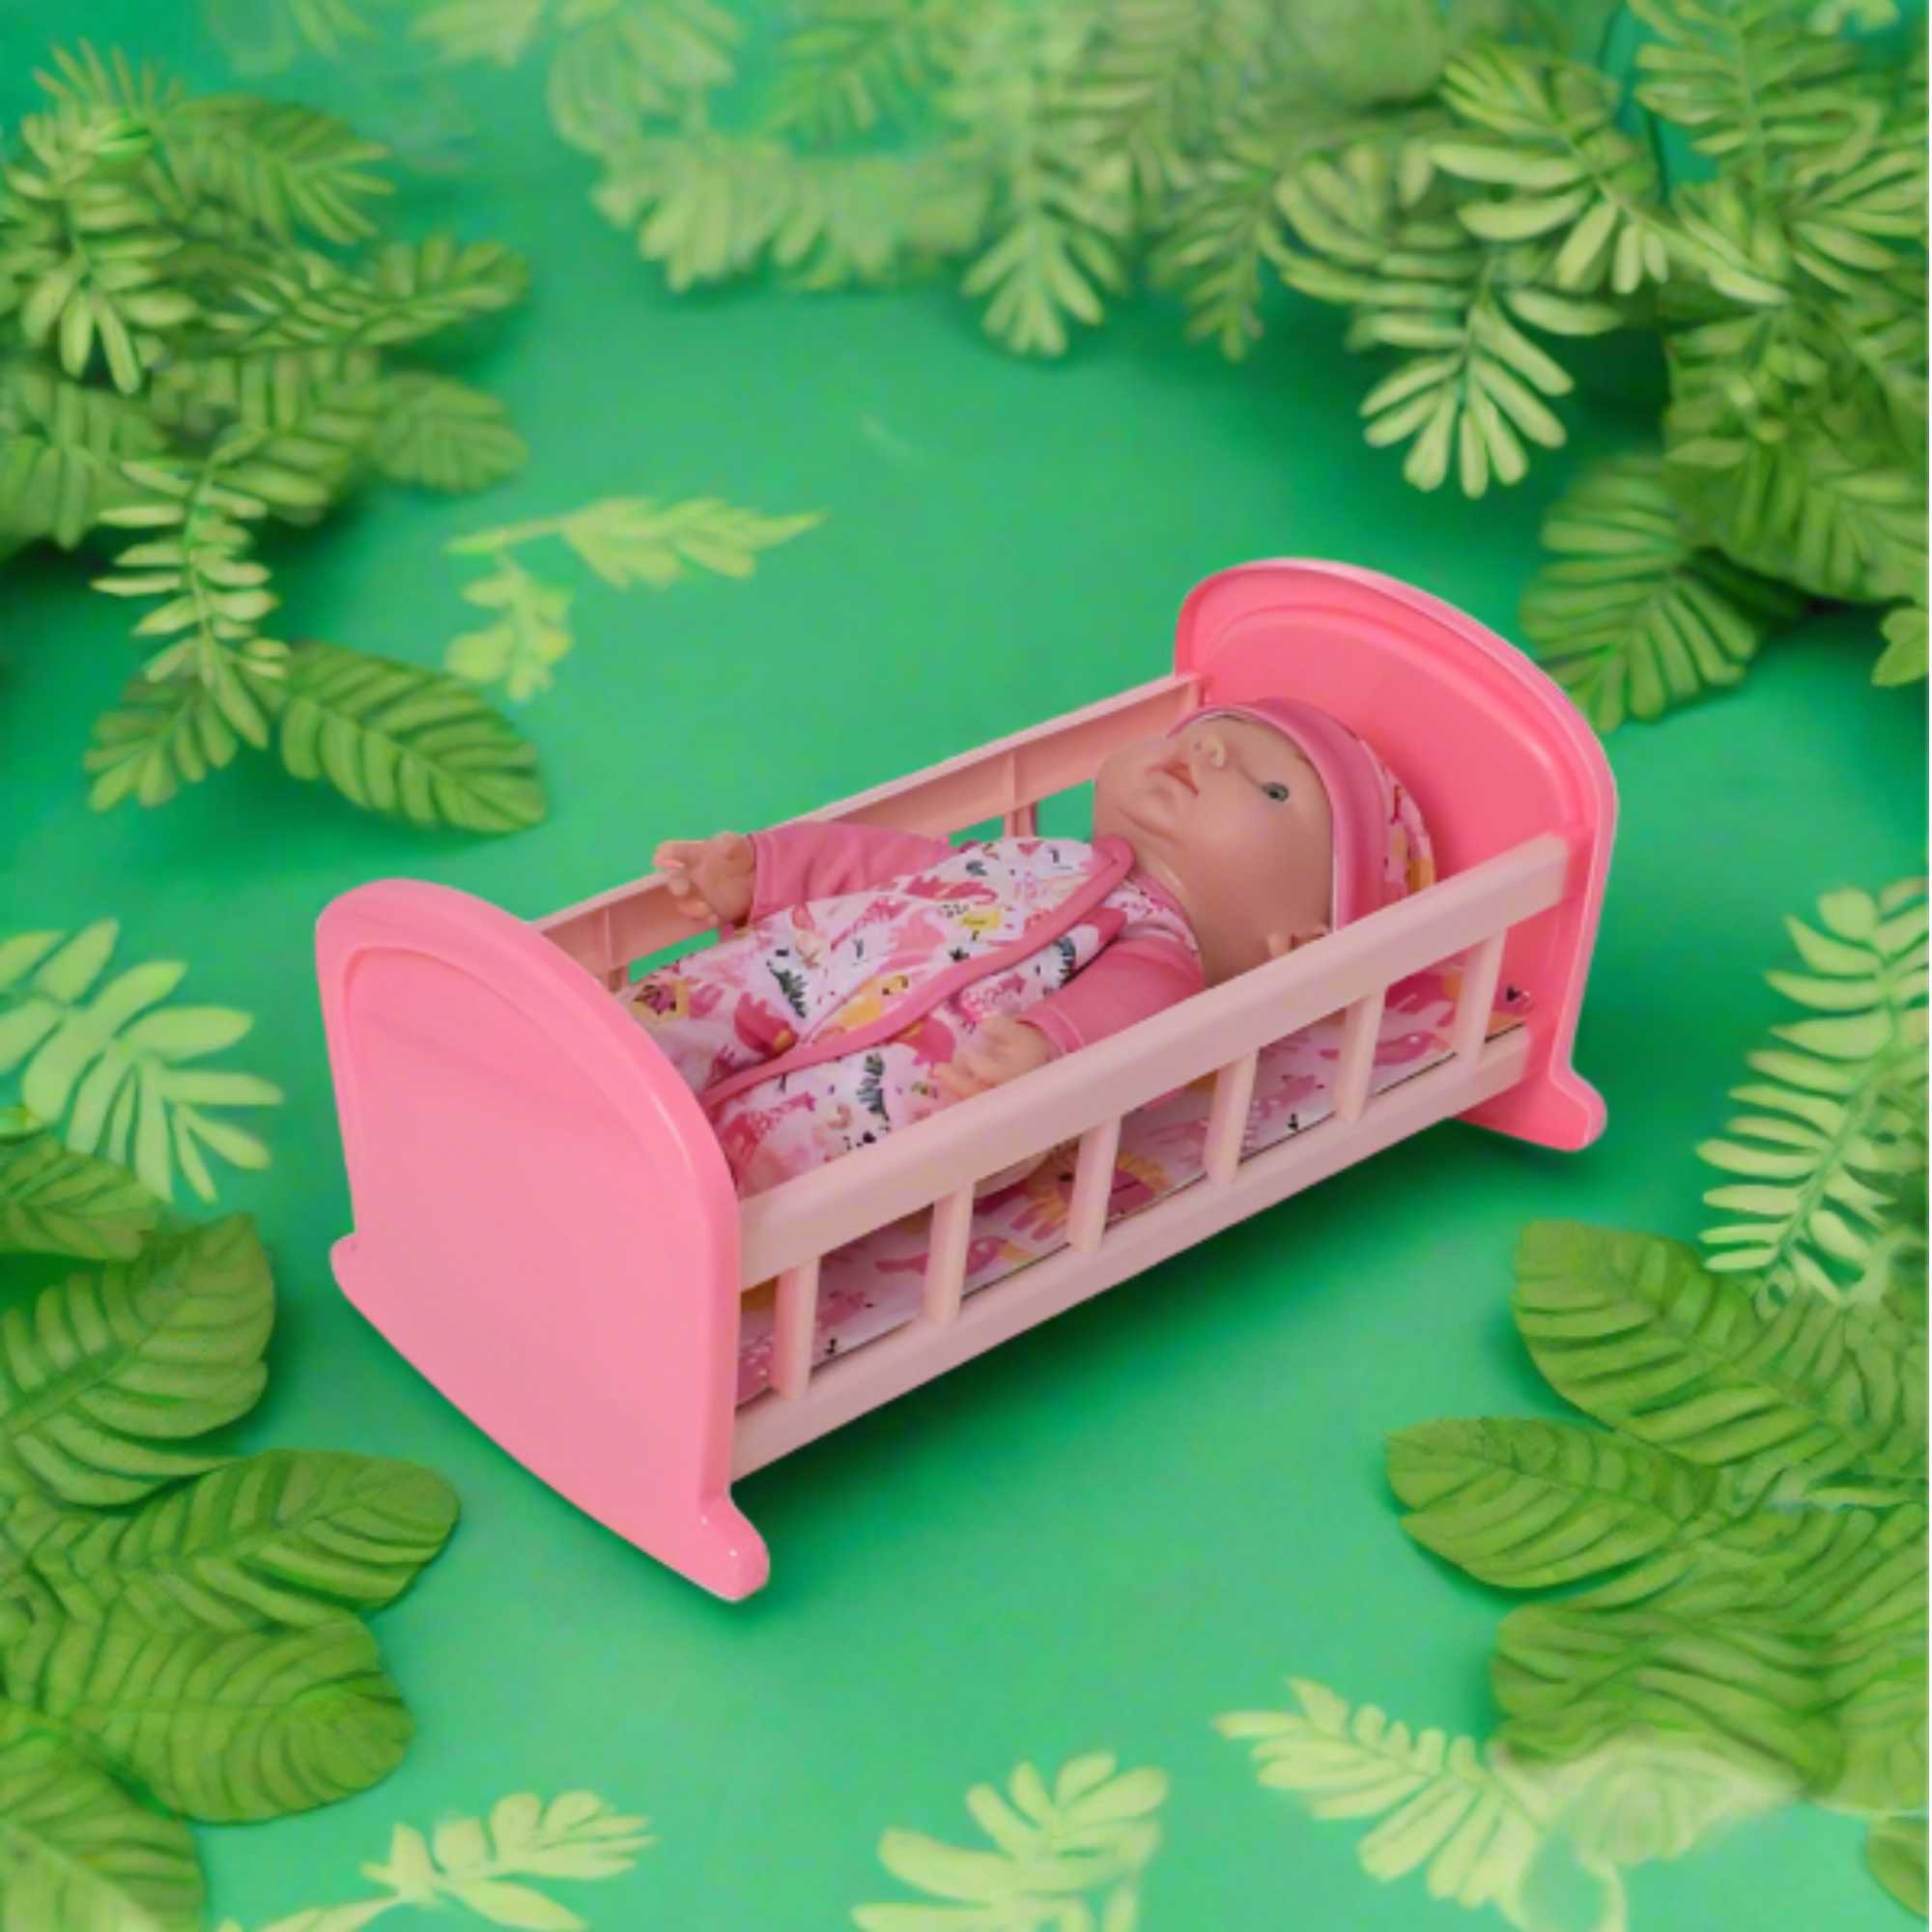 Complete with included doll, this charming cot offers a cozy resting place for dolls, fostering imaginative play and nurturing skills in children